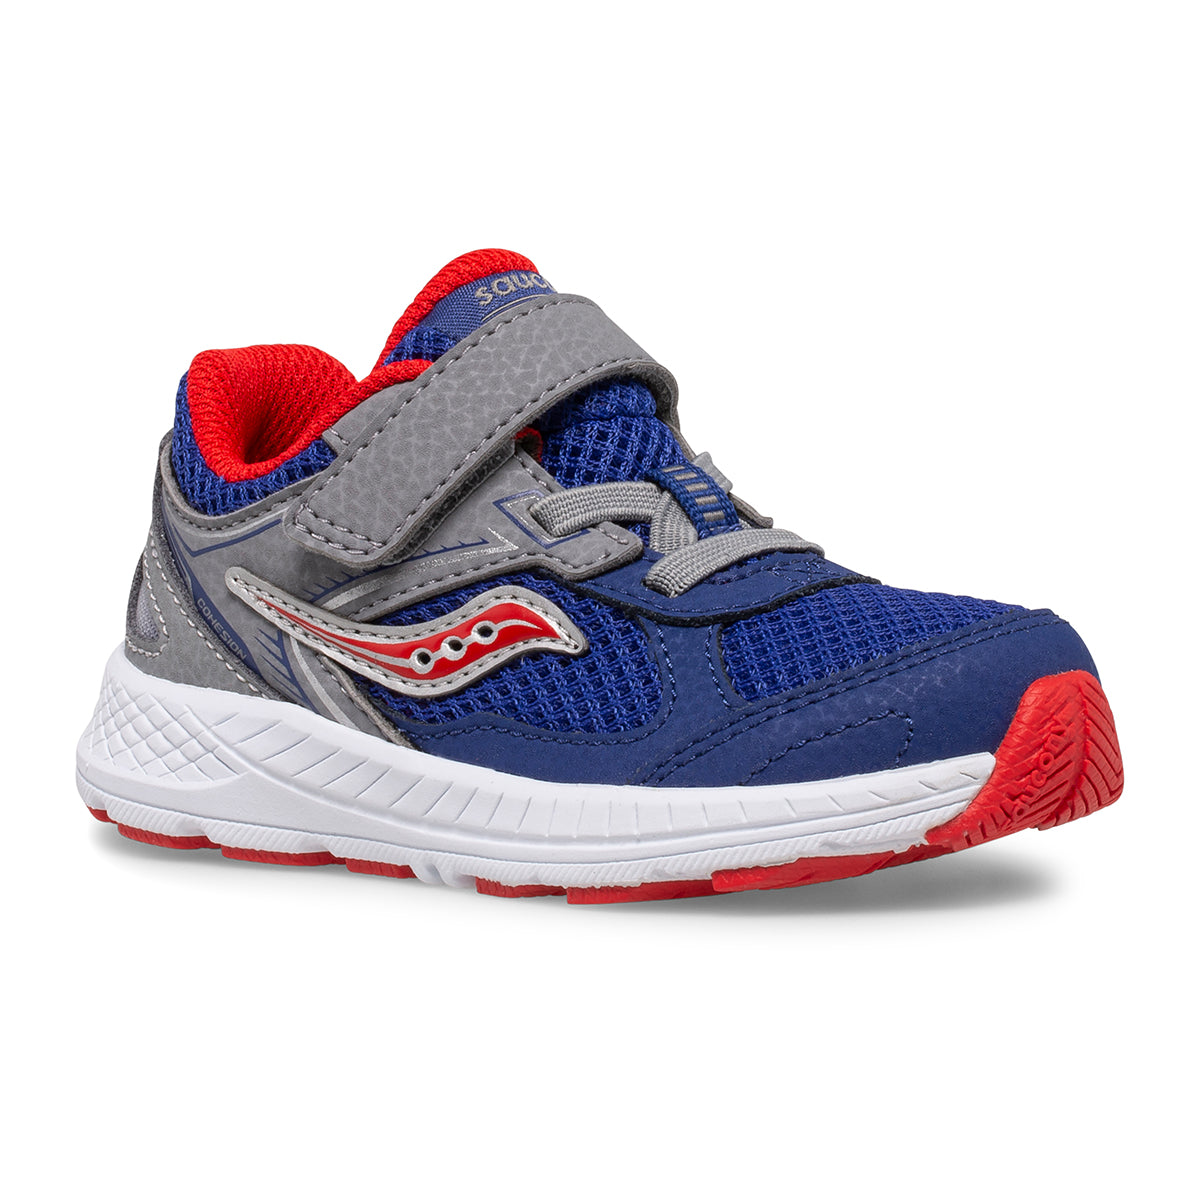 cohesion-14-ac-jr-sneaker-littlekid-navy-red__Navy/Red_1